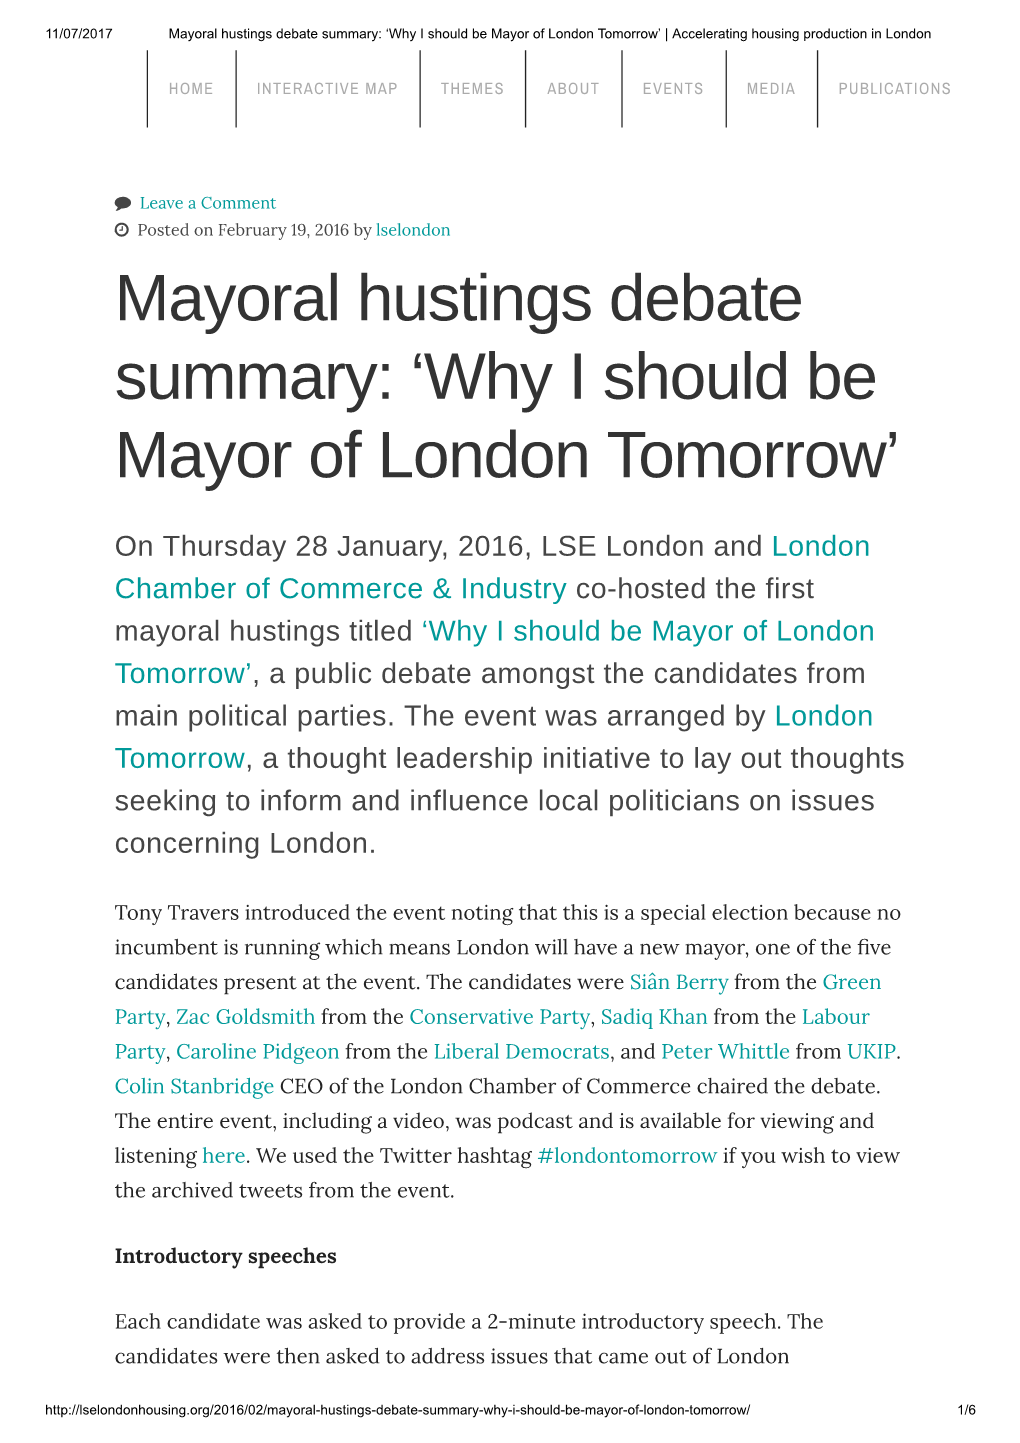 Mayoral Hustings Debate Summary: ‘Why I Should Be Mayor of London Tomorrow’ | Accelerating Housing Production in London